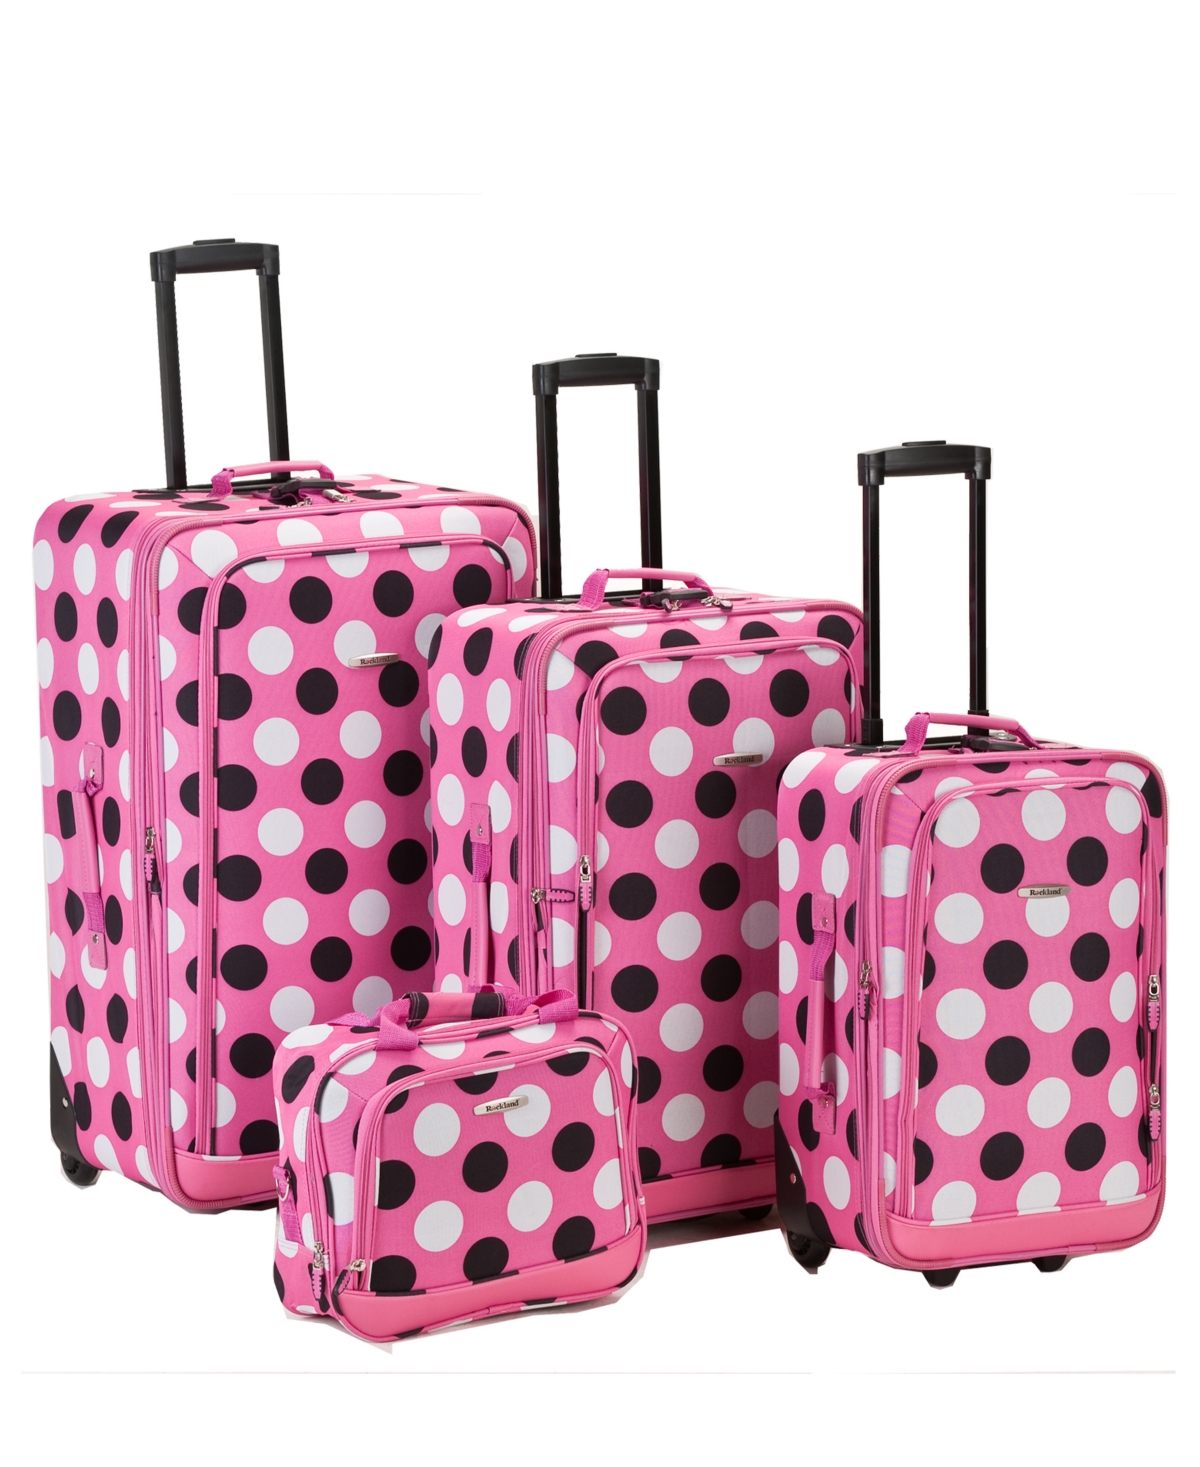 Rockland 4-pc. Softside Luggage Set In Black  White Dots On Pink